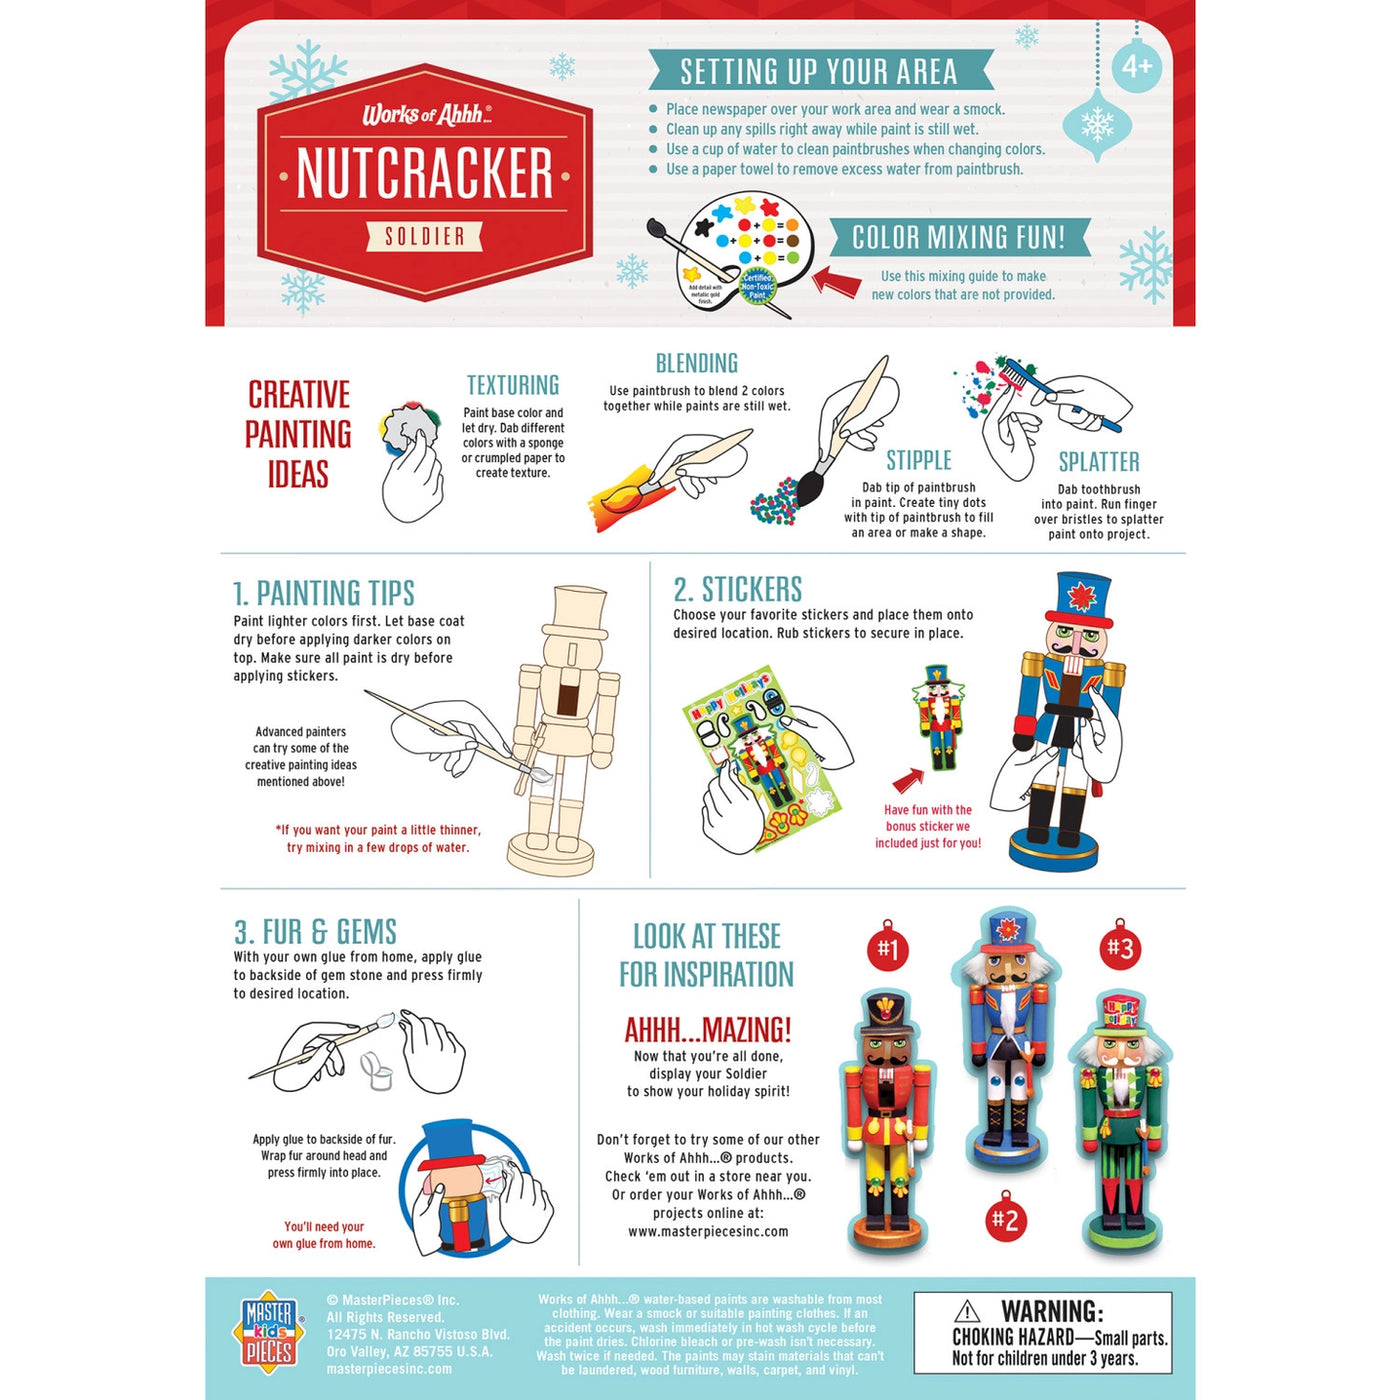 Nutcracker Soldier - Holiday Wood Paint Kit